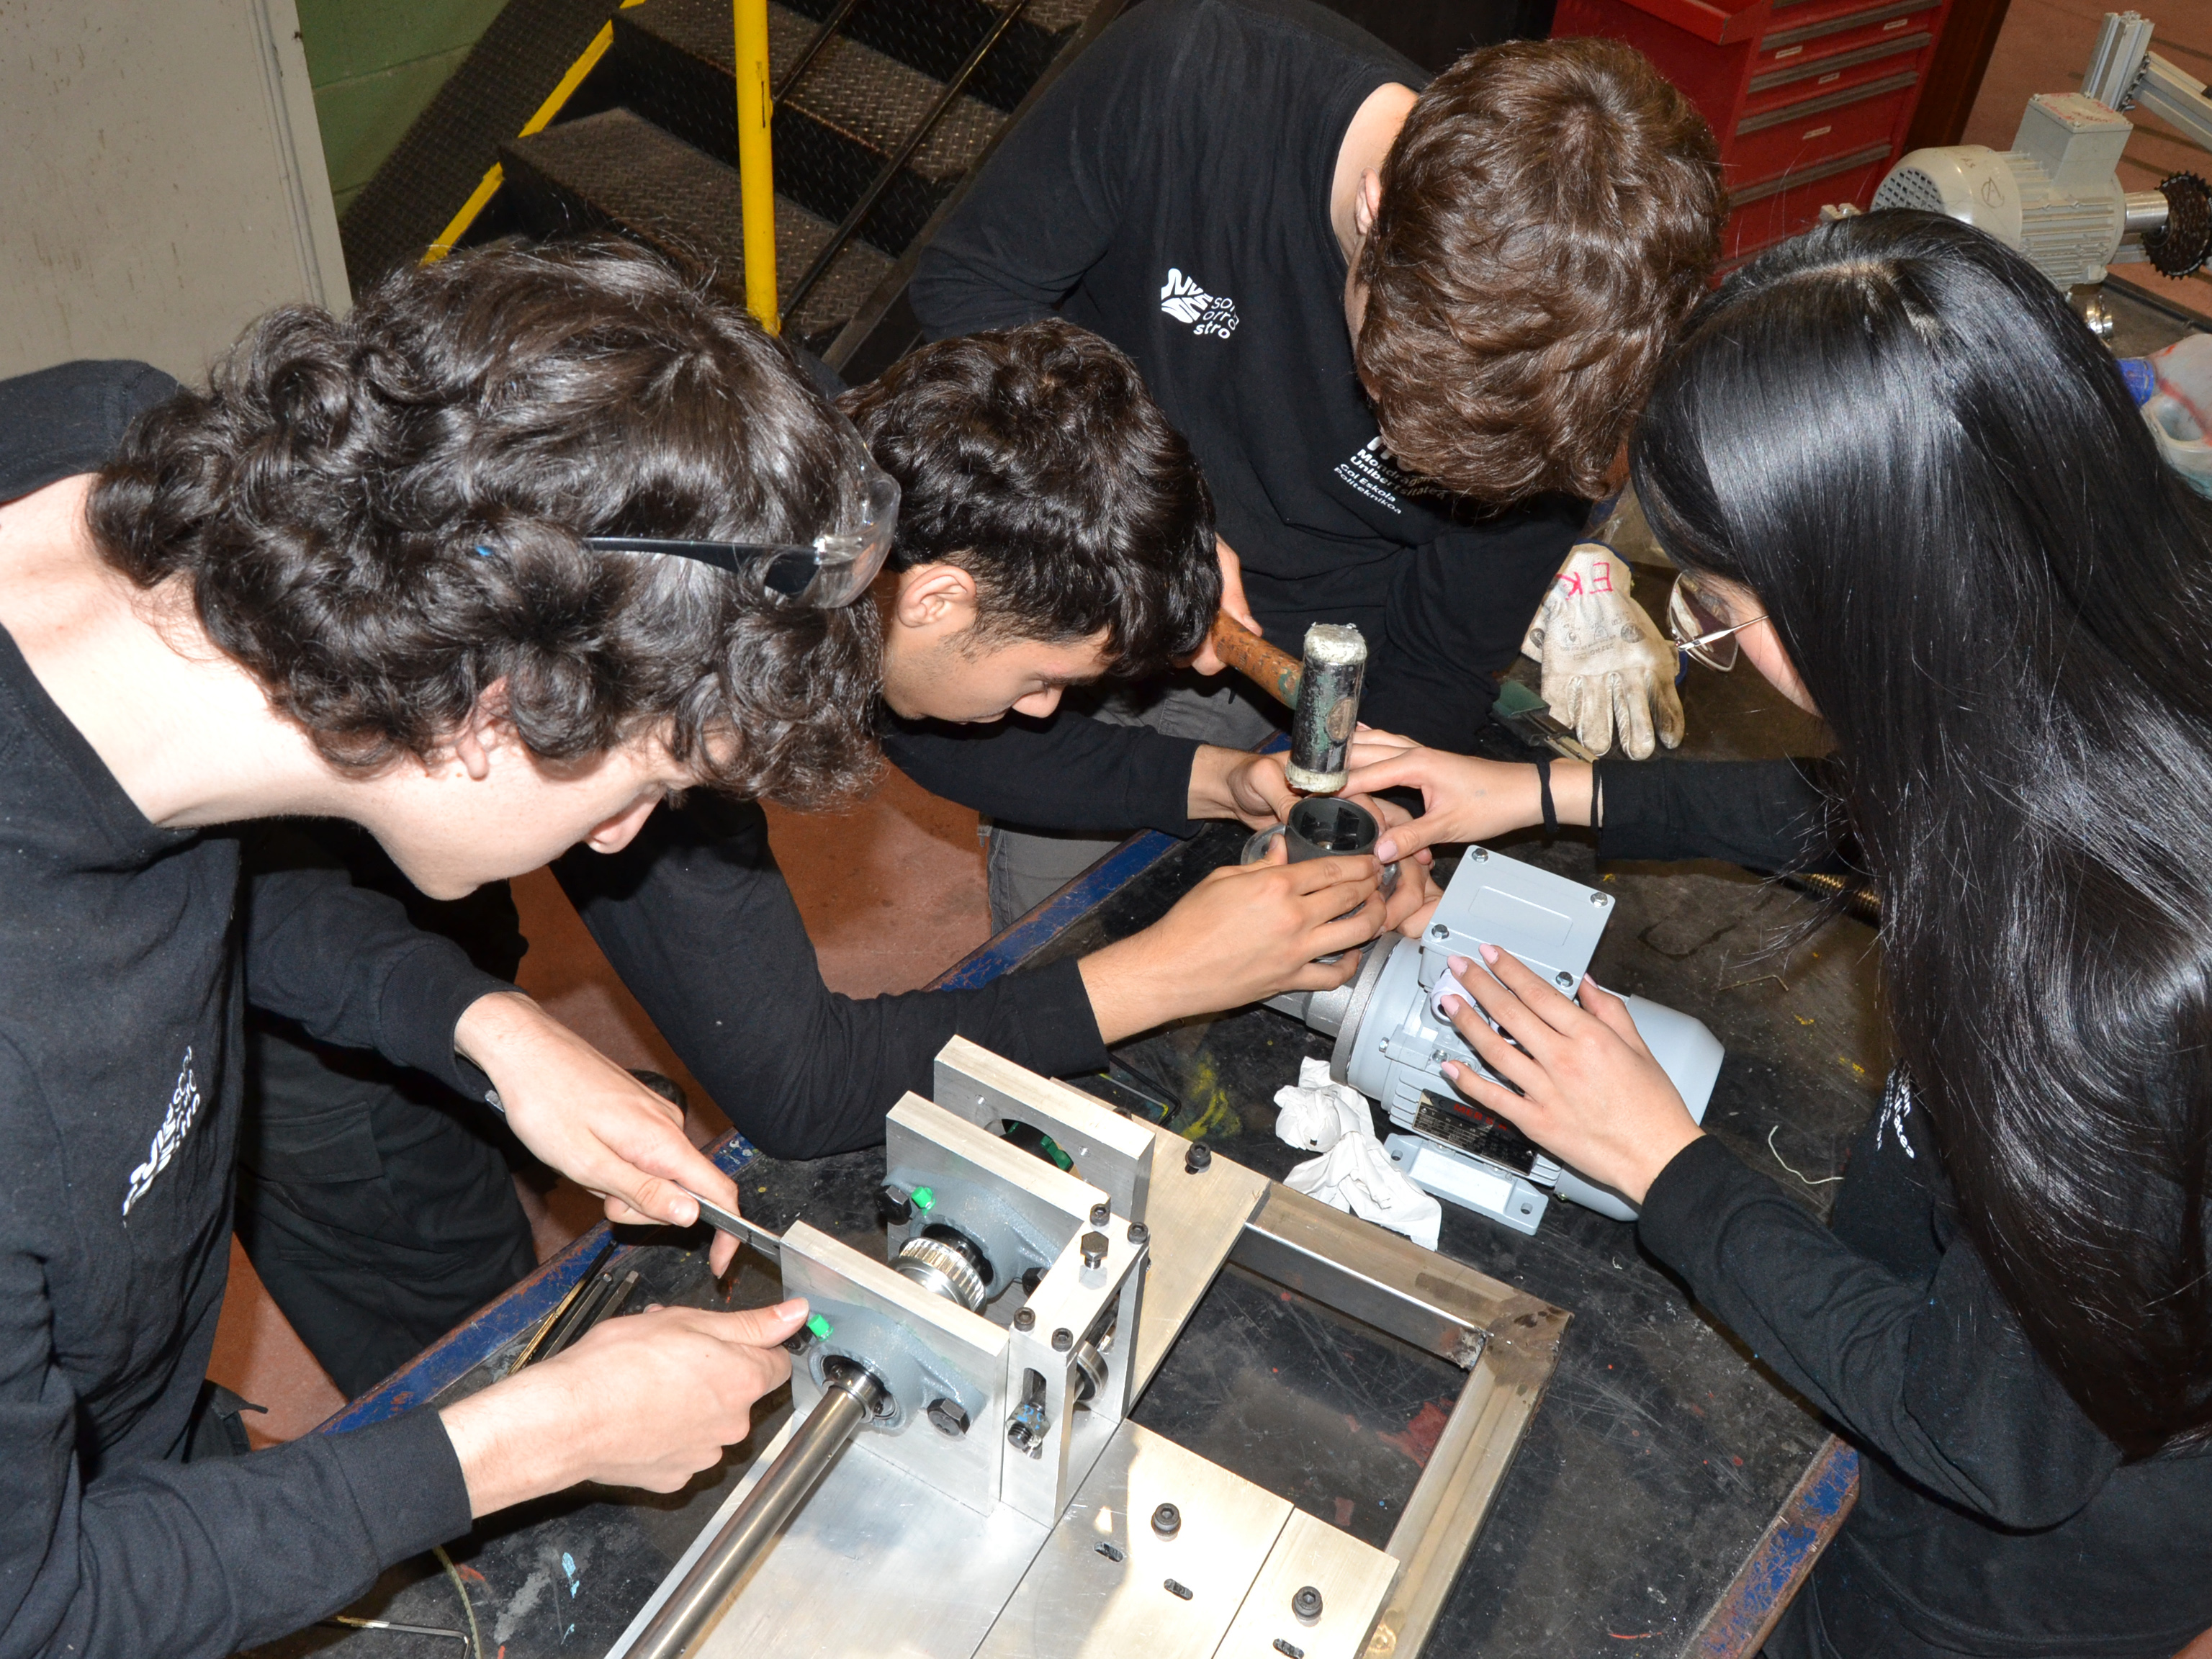 Students from the Mondragon Unibertsitatea Degree in Mechatronics Engineering develop a machine for manufacturing springs in our Centre’s laboratories